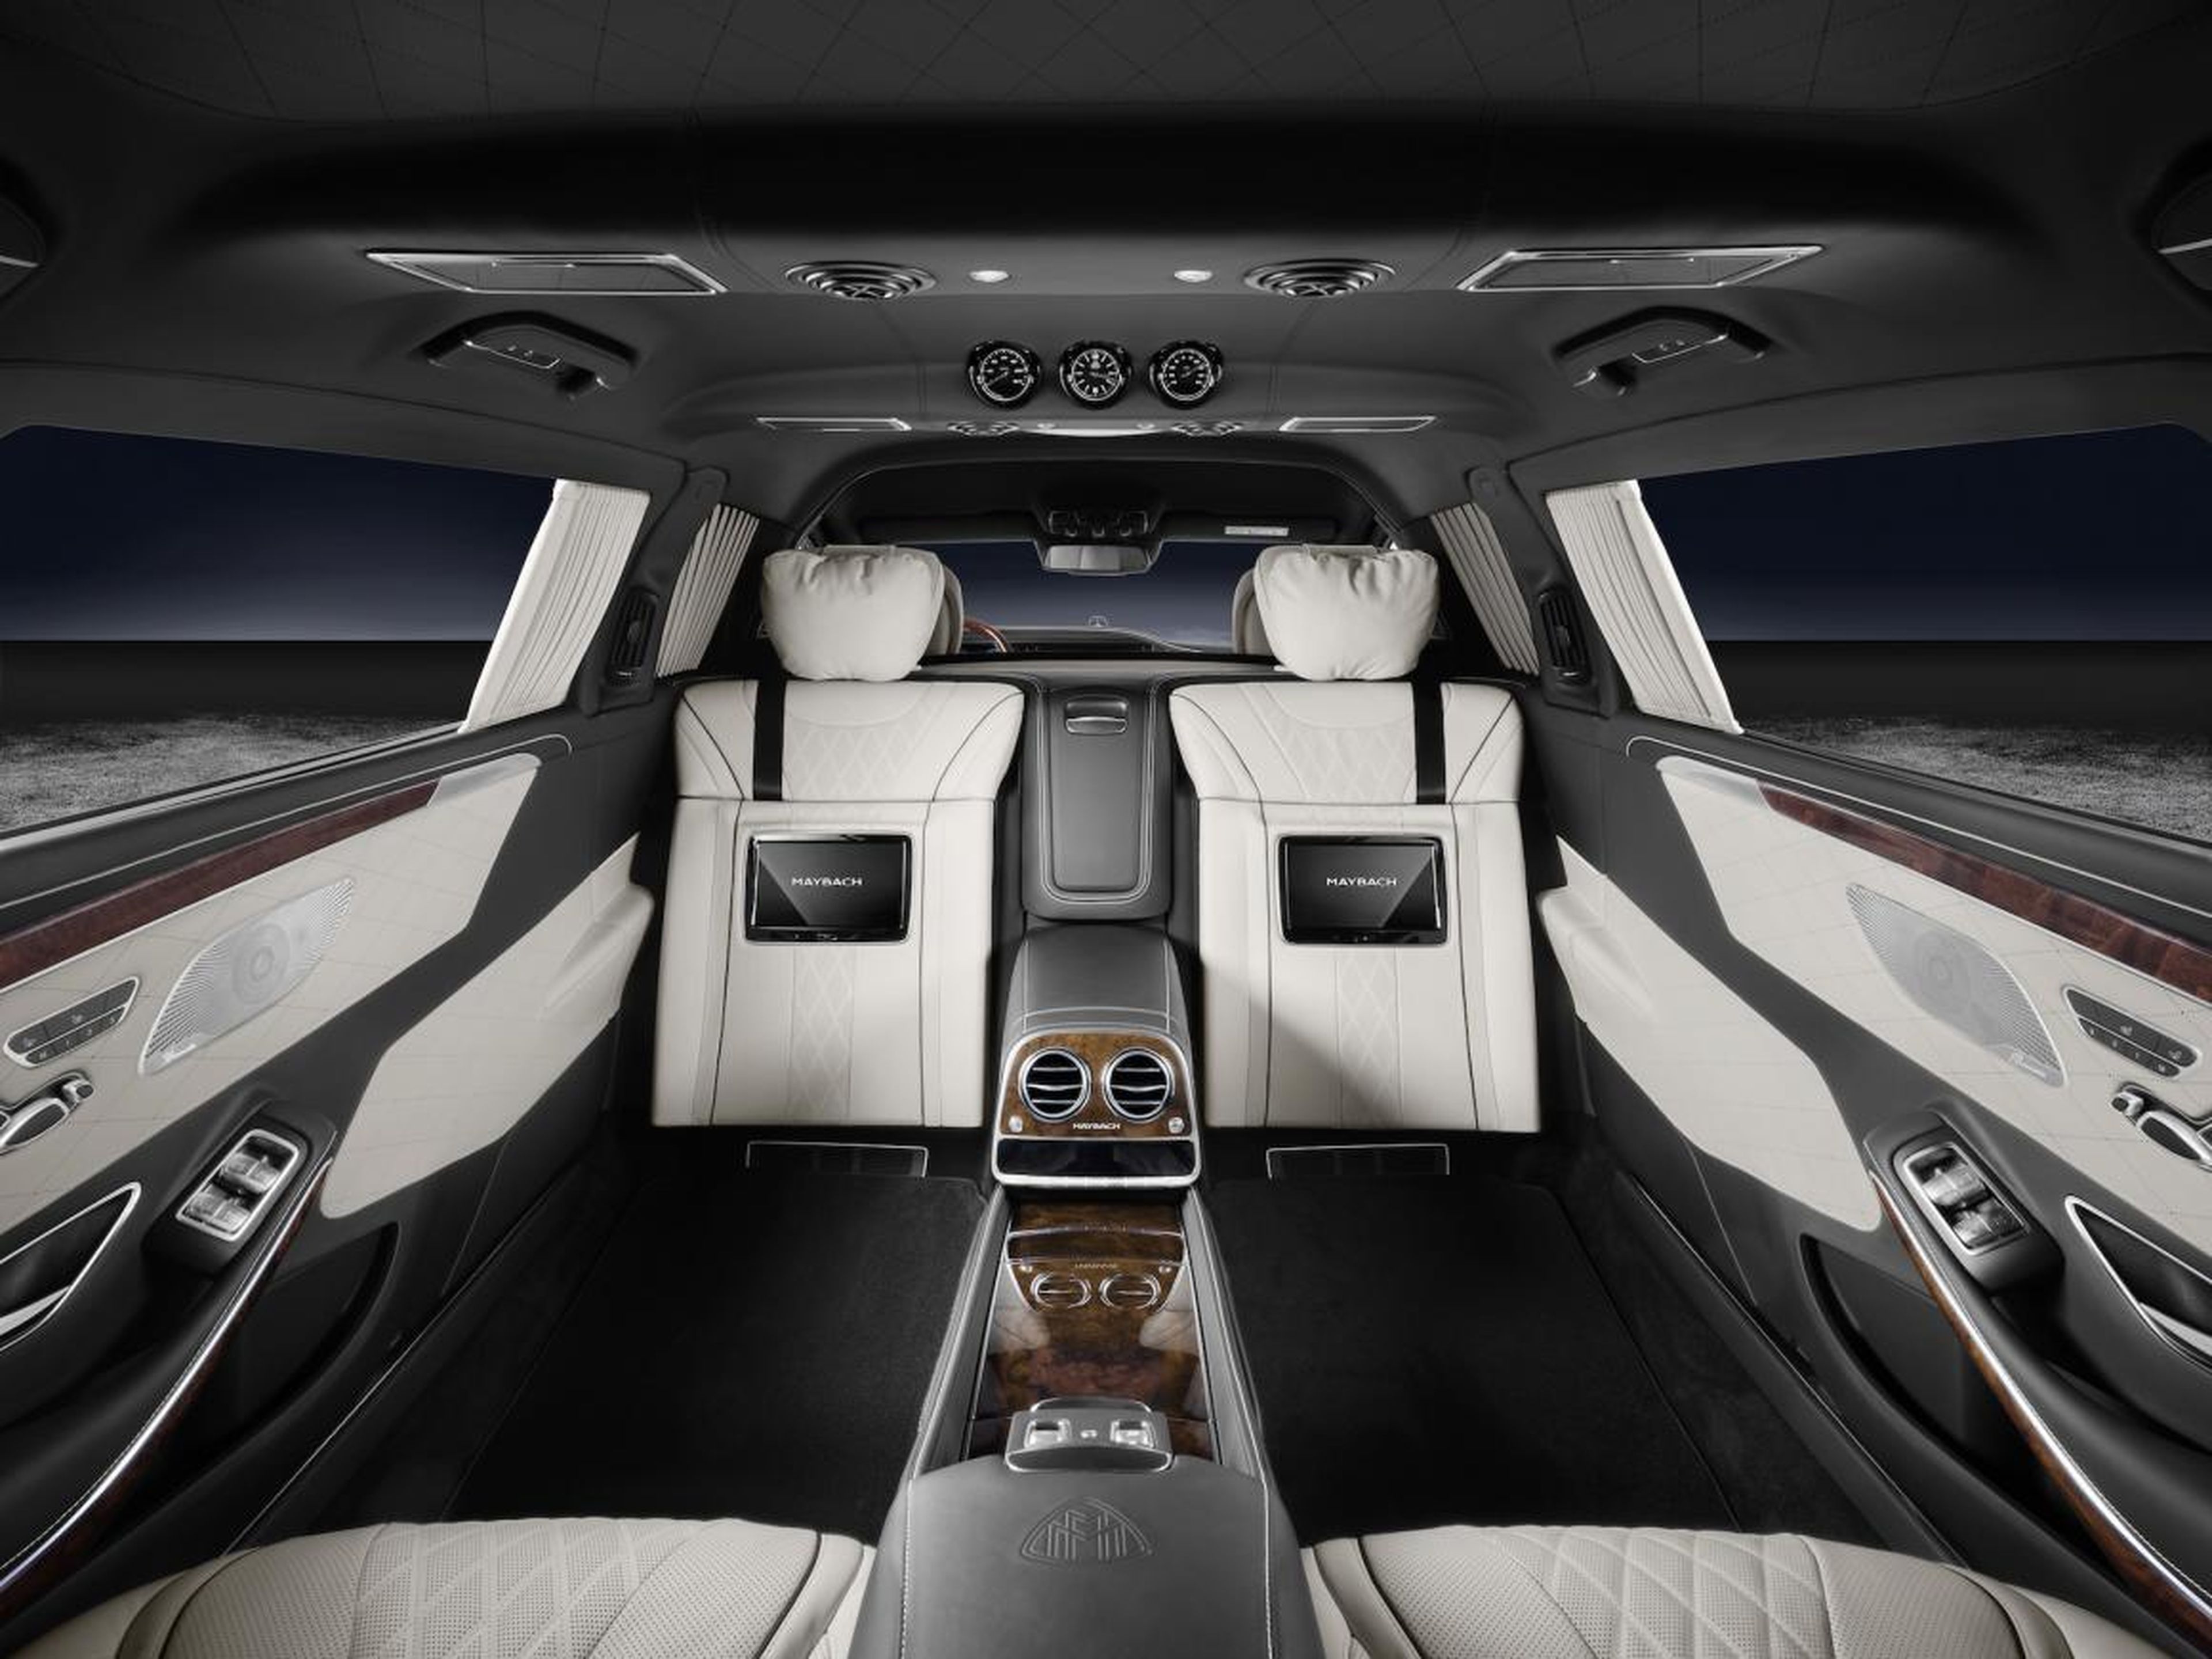 The Pullman Guard's rear cabin can also be fitted with rearward-facing jump seats to increase seating capacity for in-car meetings.